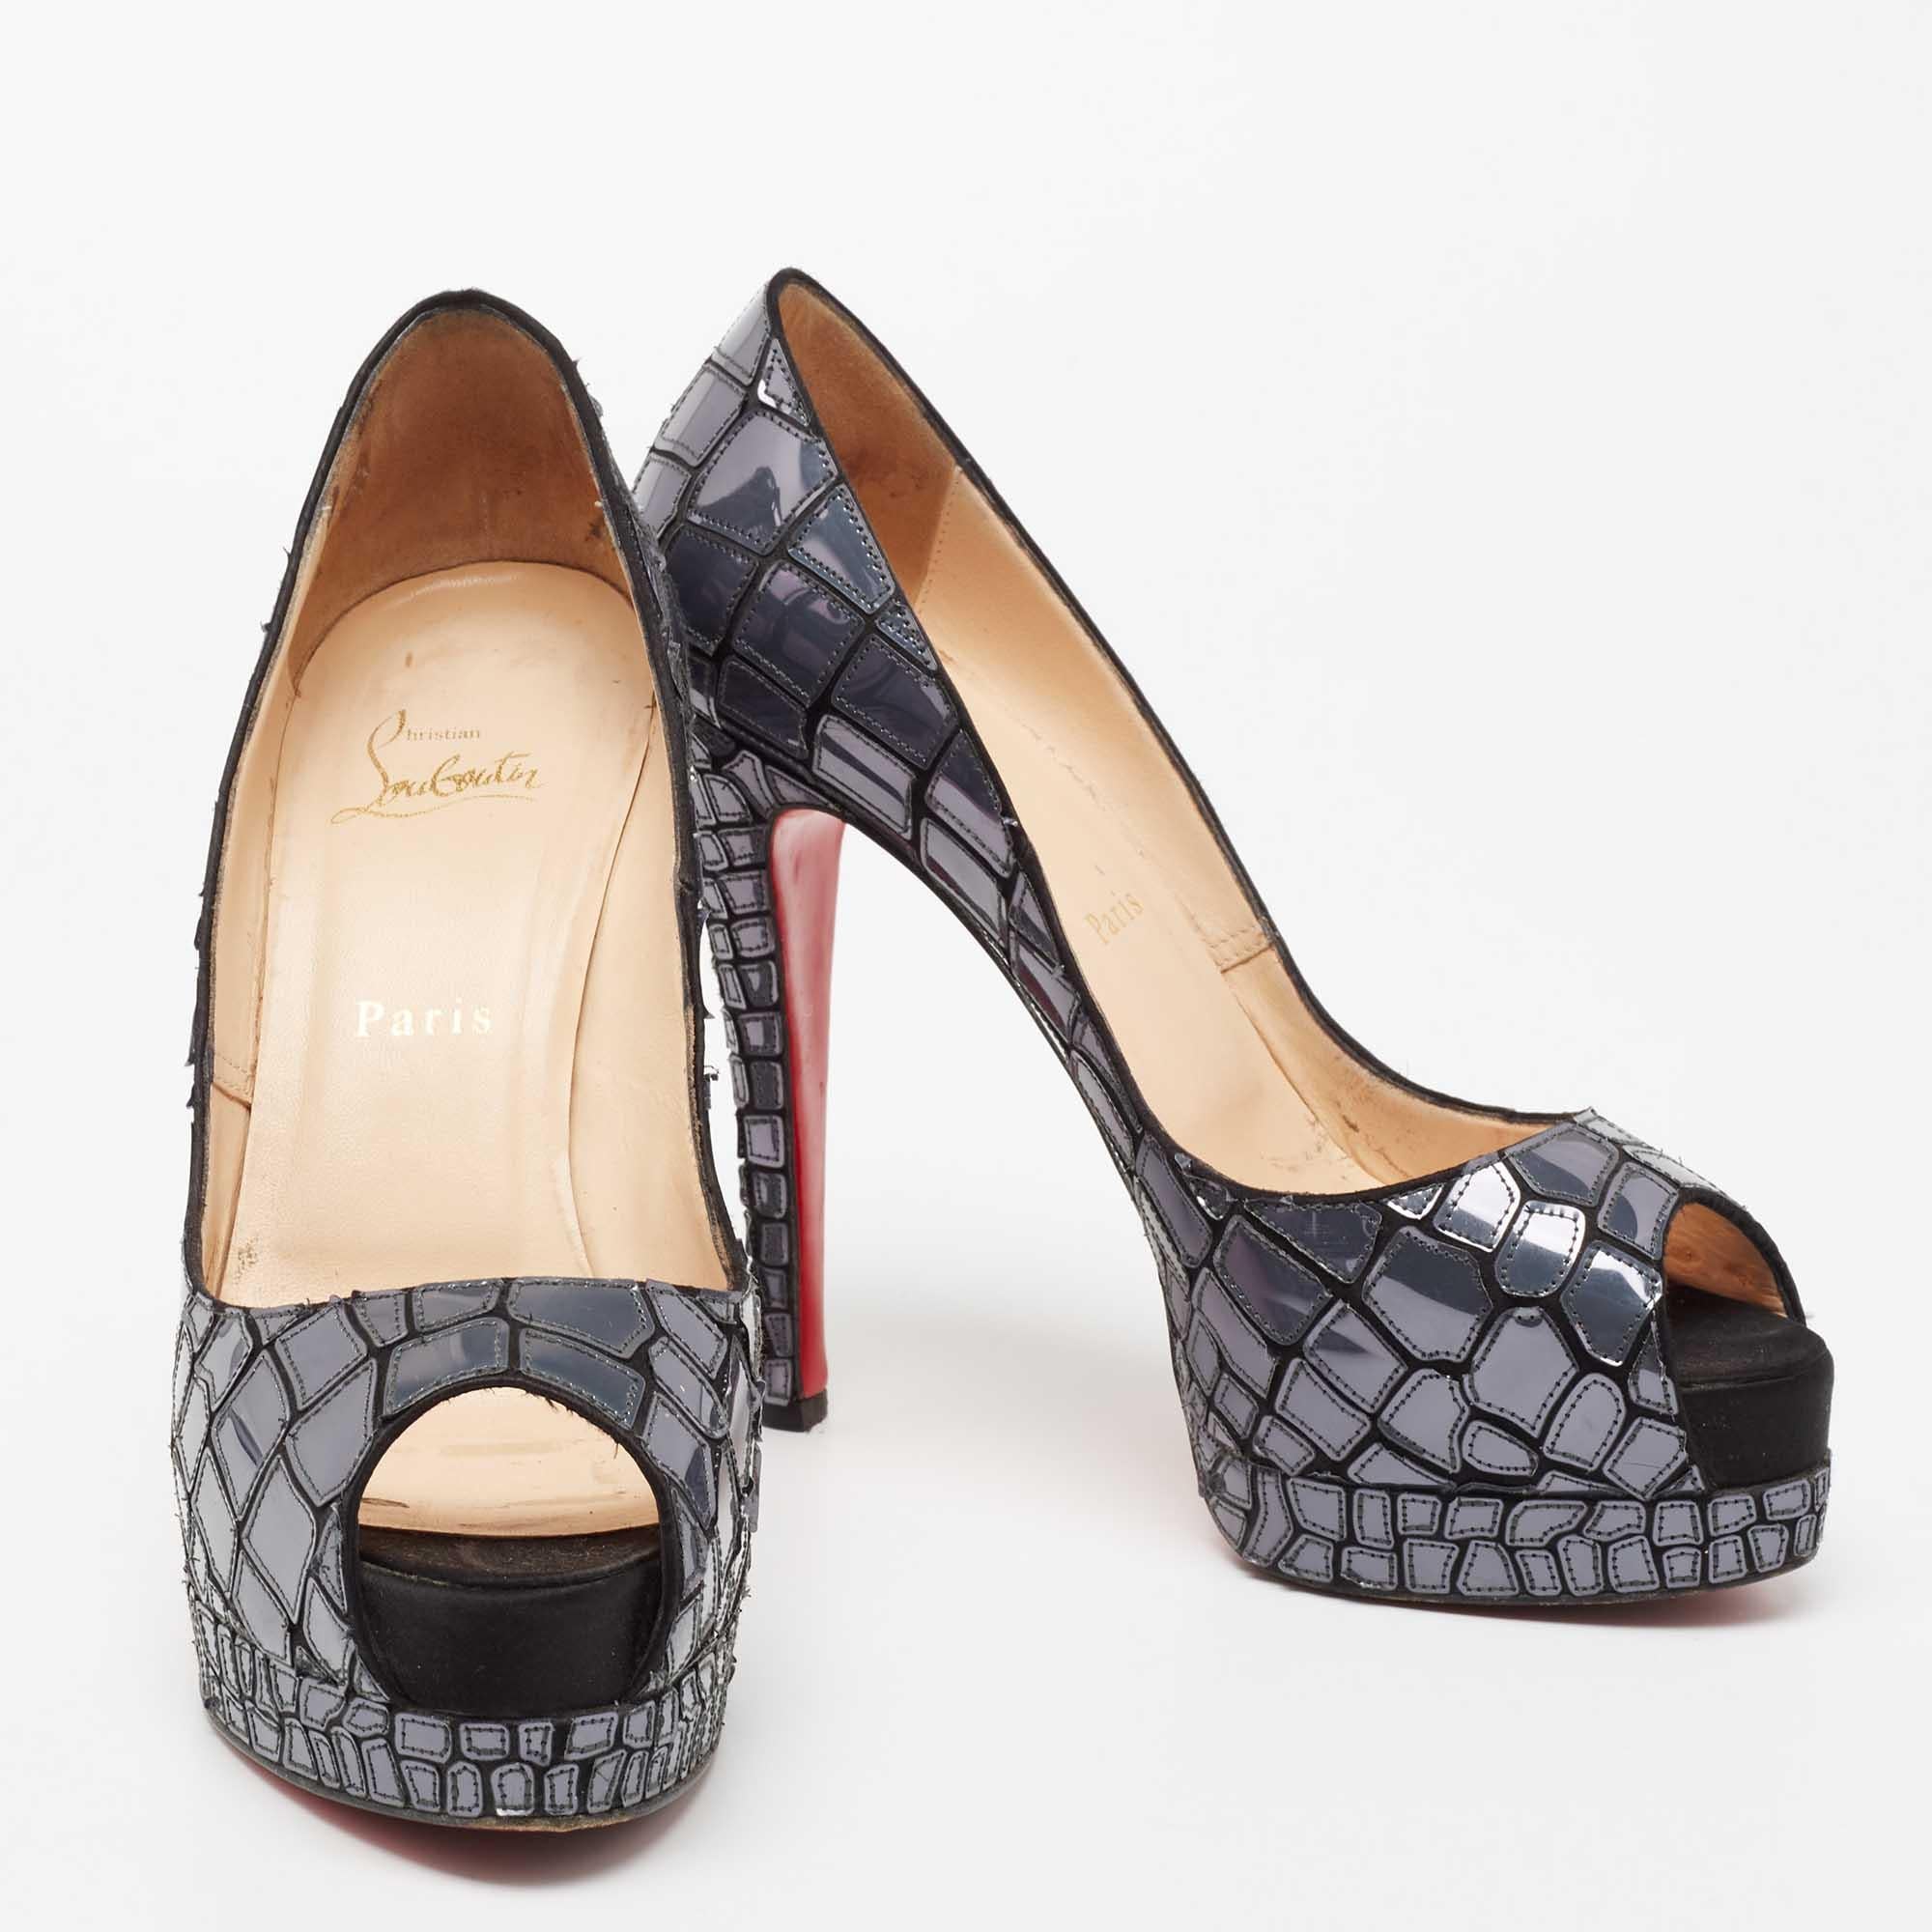 Gray Christian Louboutin Slate Grey/Black Patent Leather and Satin Mosaic Sobek Peep- For Sale